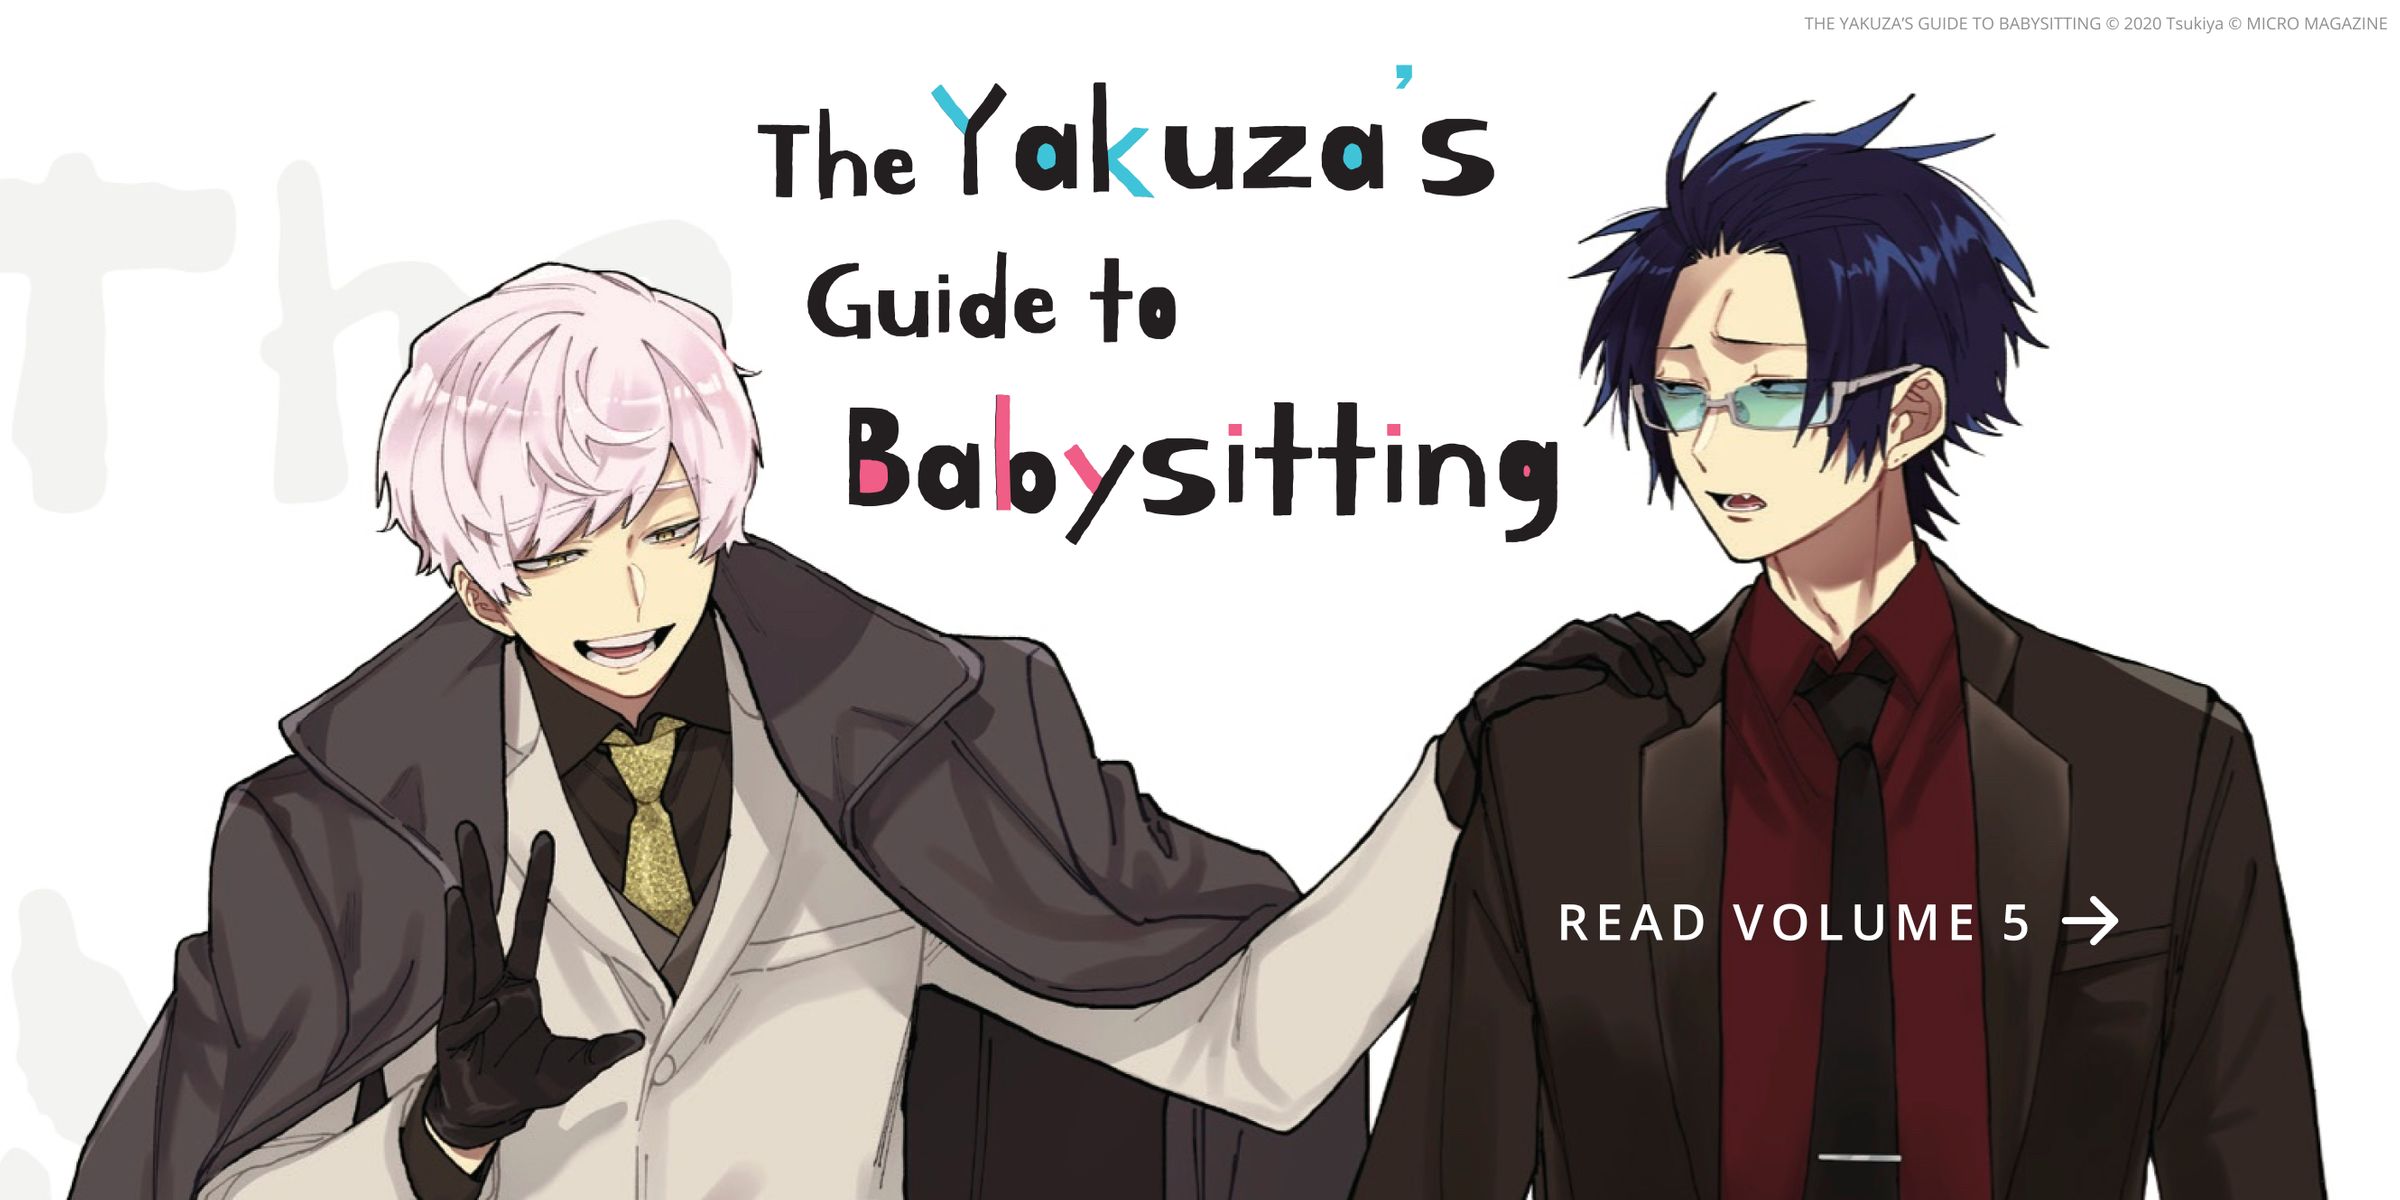 Two yakuza in suits standing next to each other. One is laughing and the other looks uncomfortable. The Yakuza’s Guide to Babysitting. Read Volume 5.